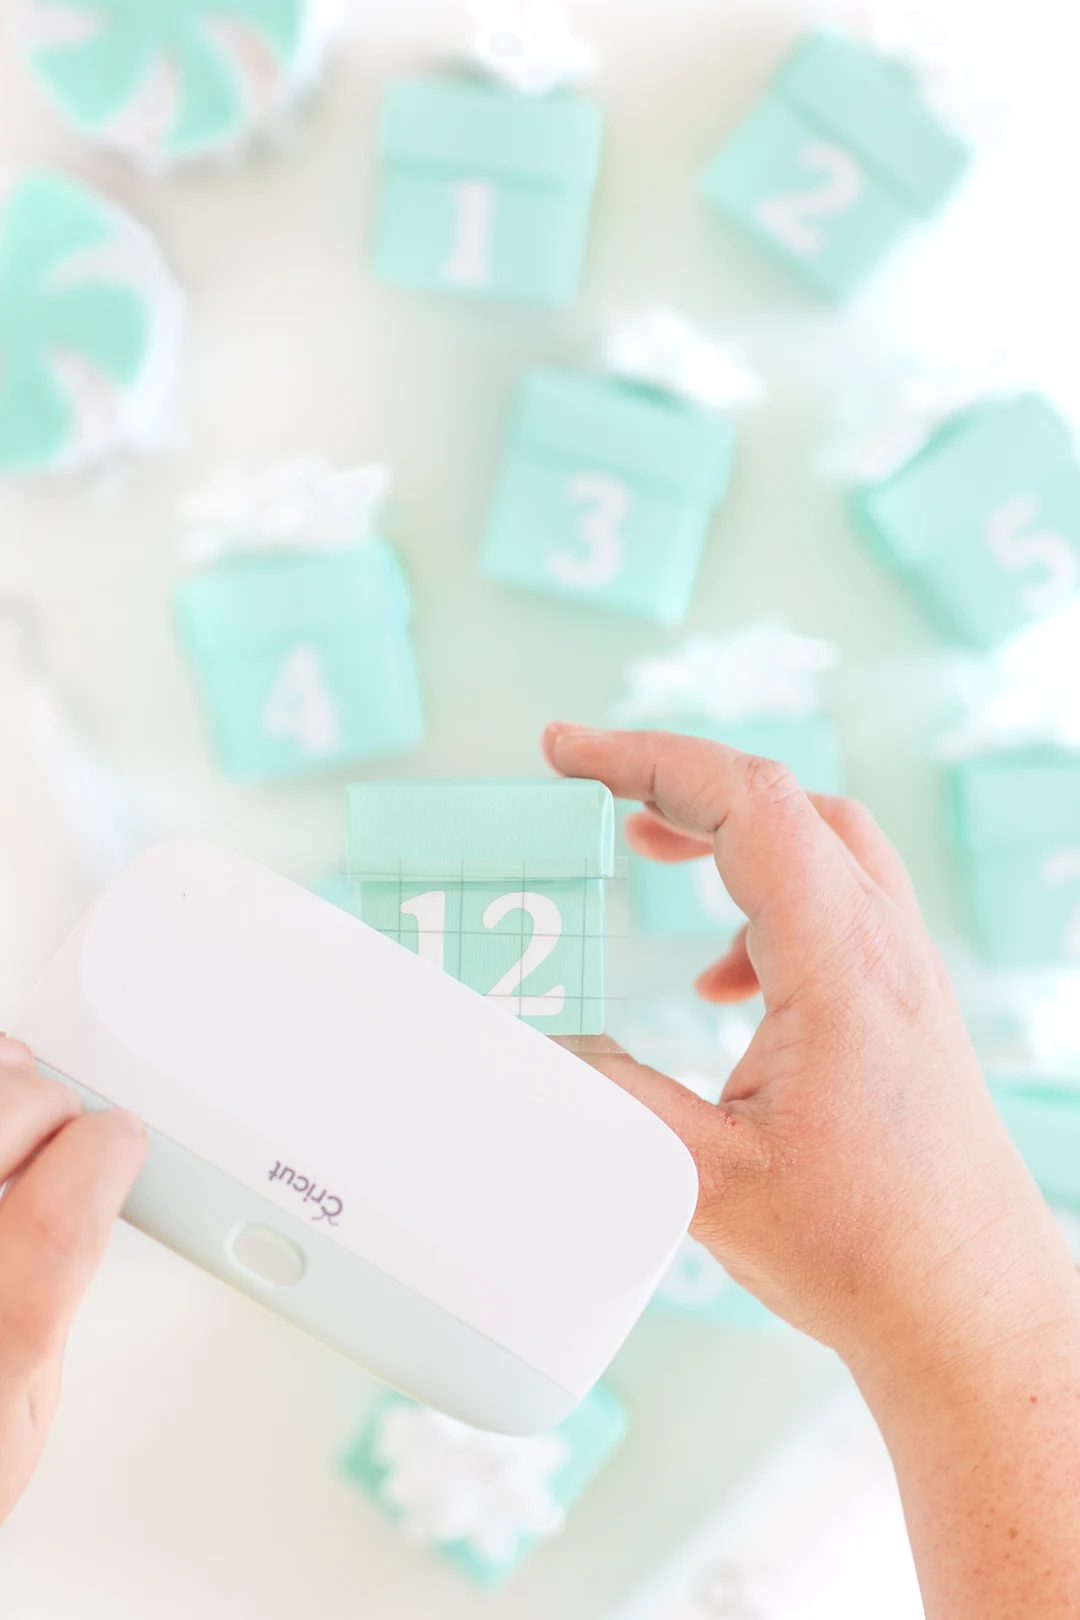 Adding cricut numbers to mini teal gift boxes for an advent countdown